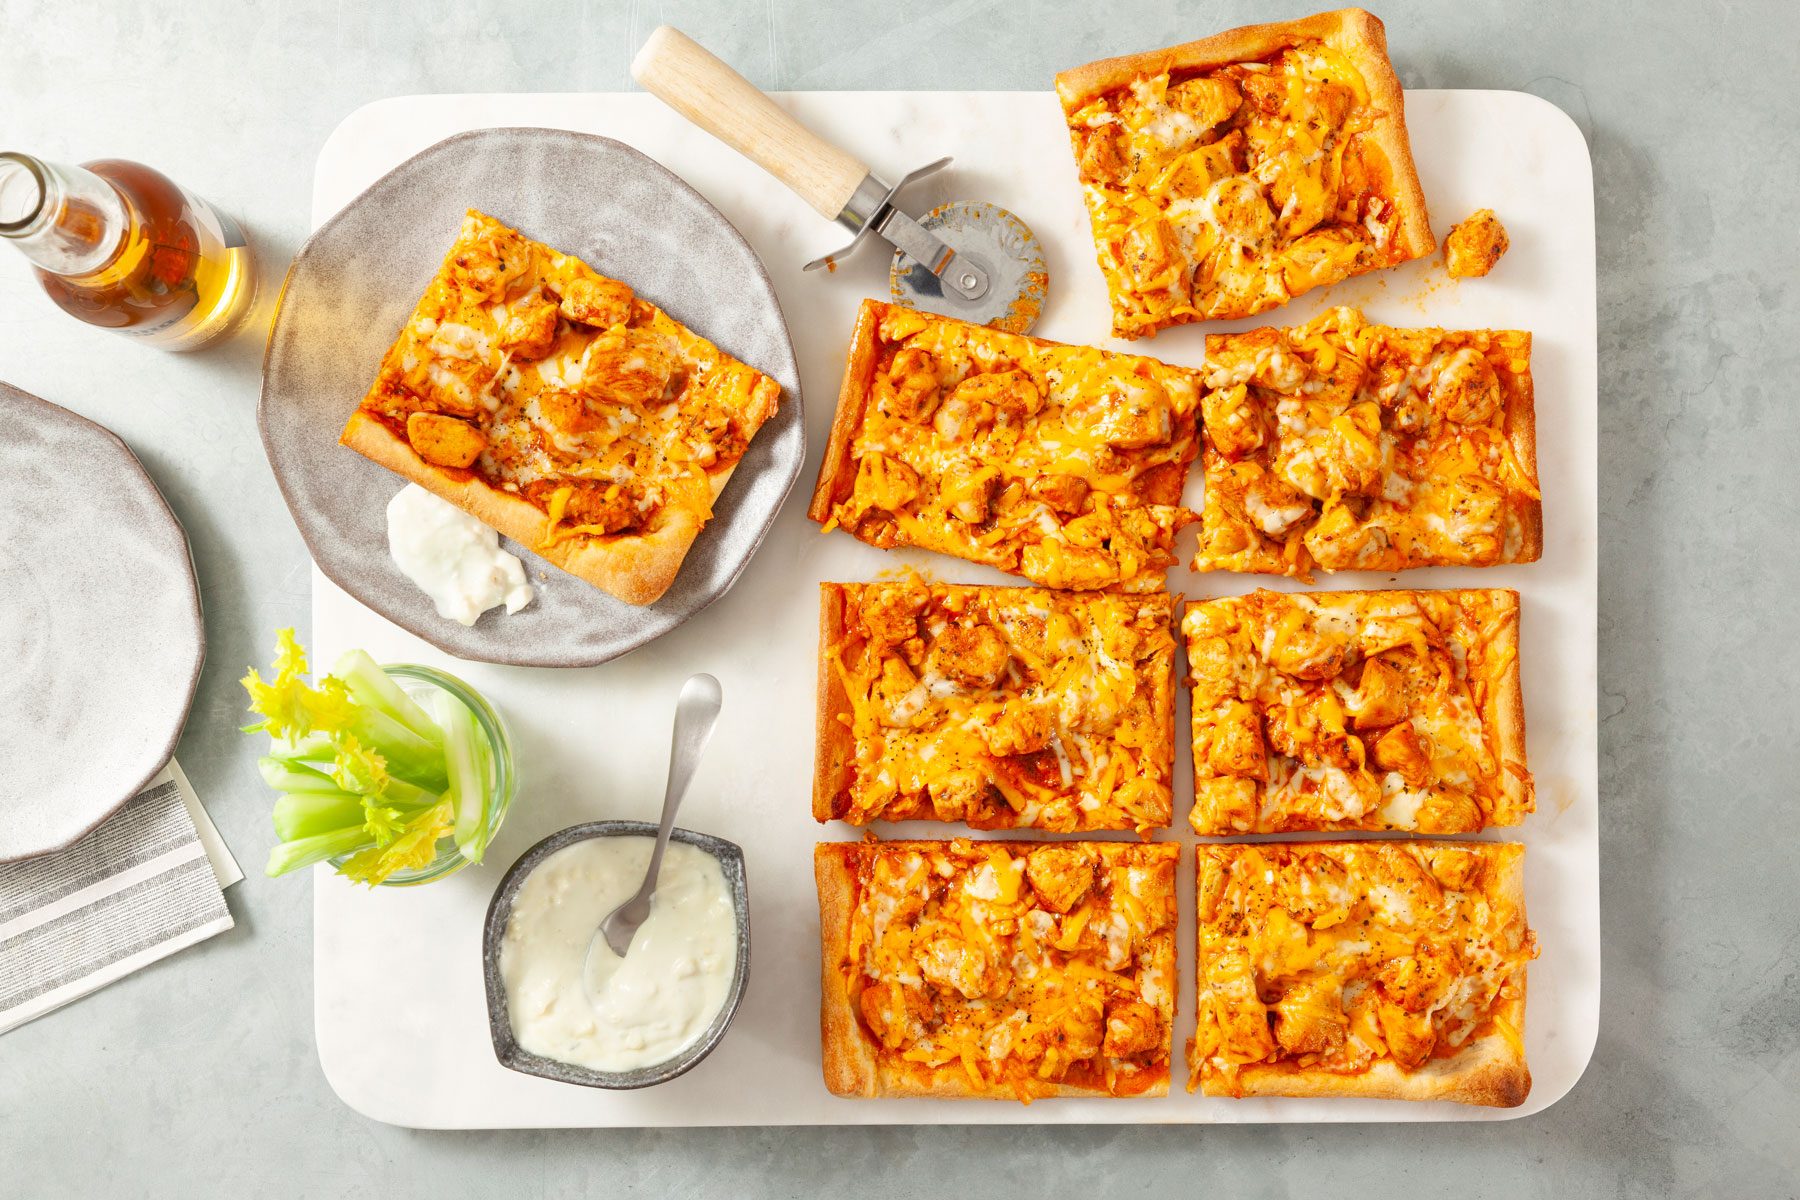 Slices of Buffalo Chicken Pizza served in a plate with a drink